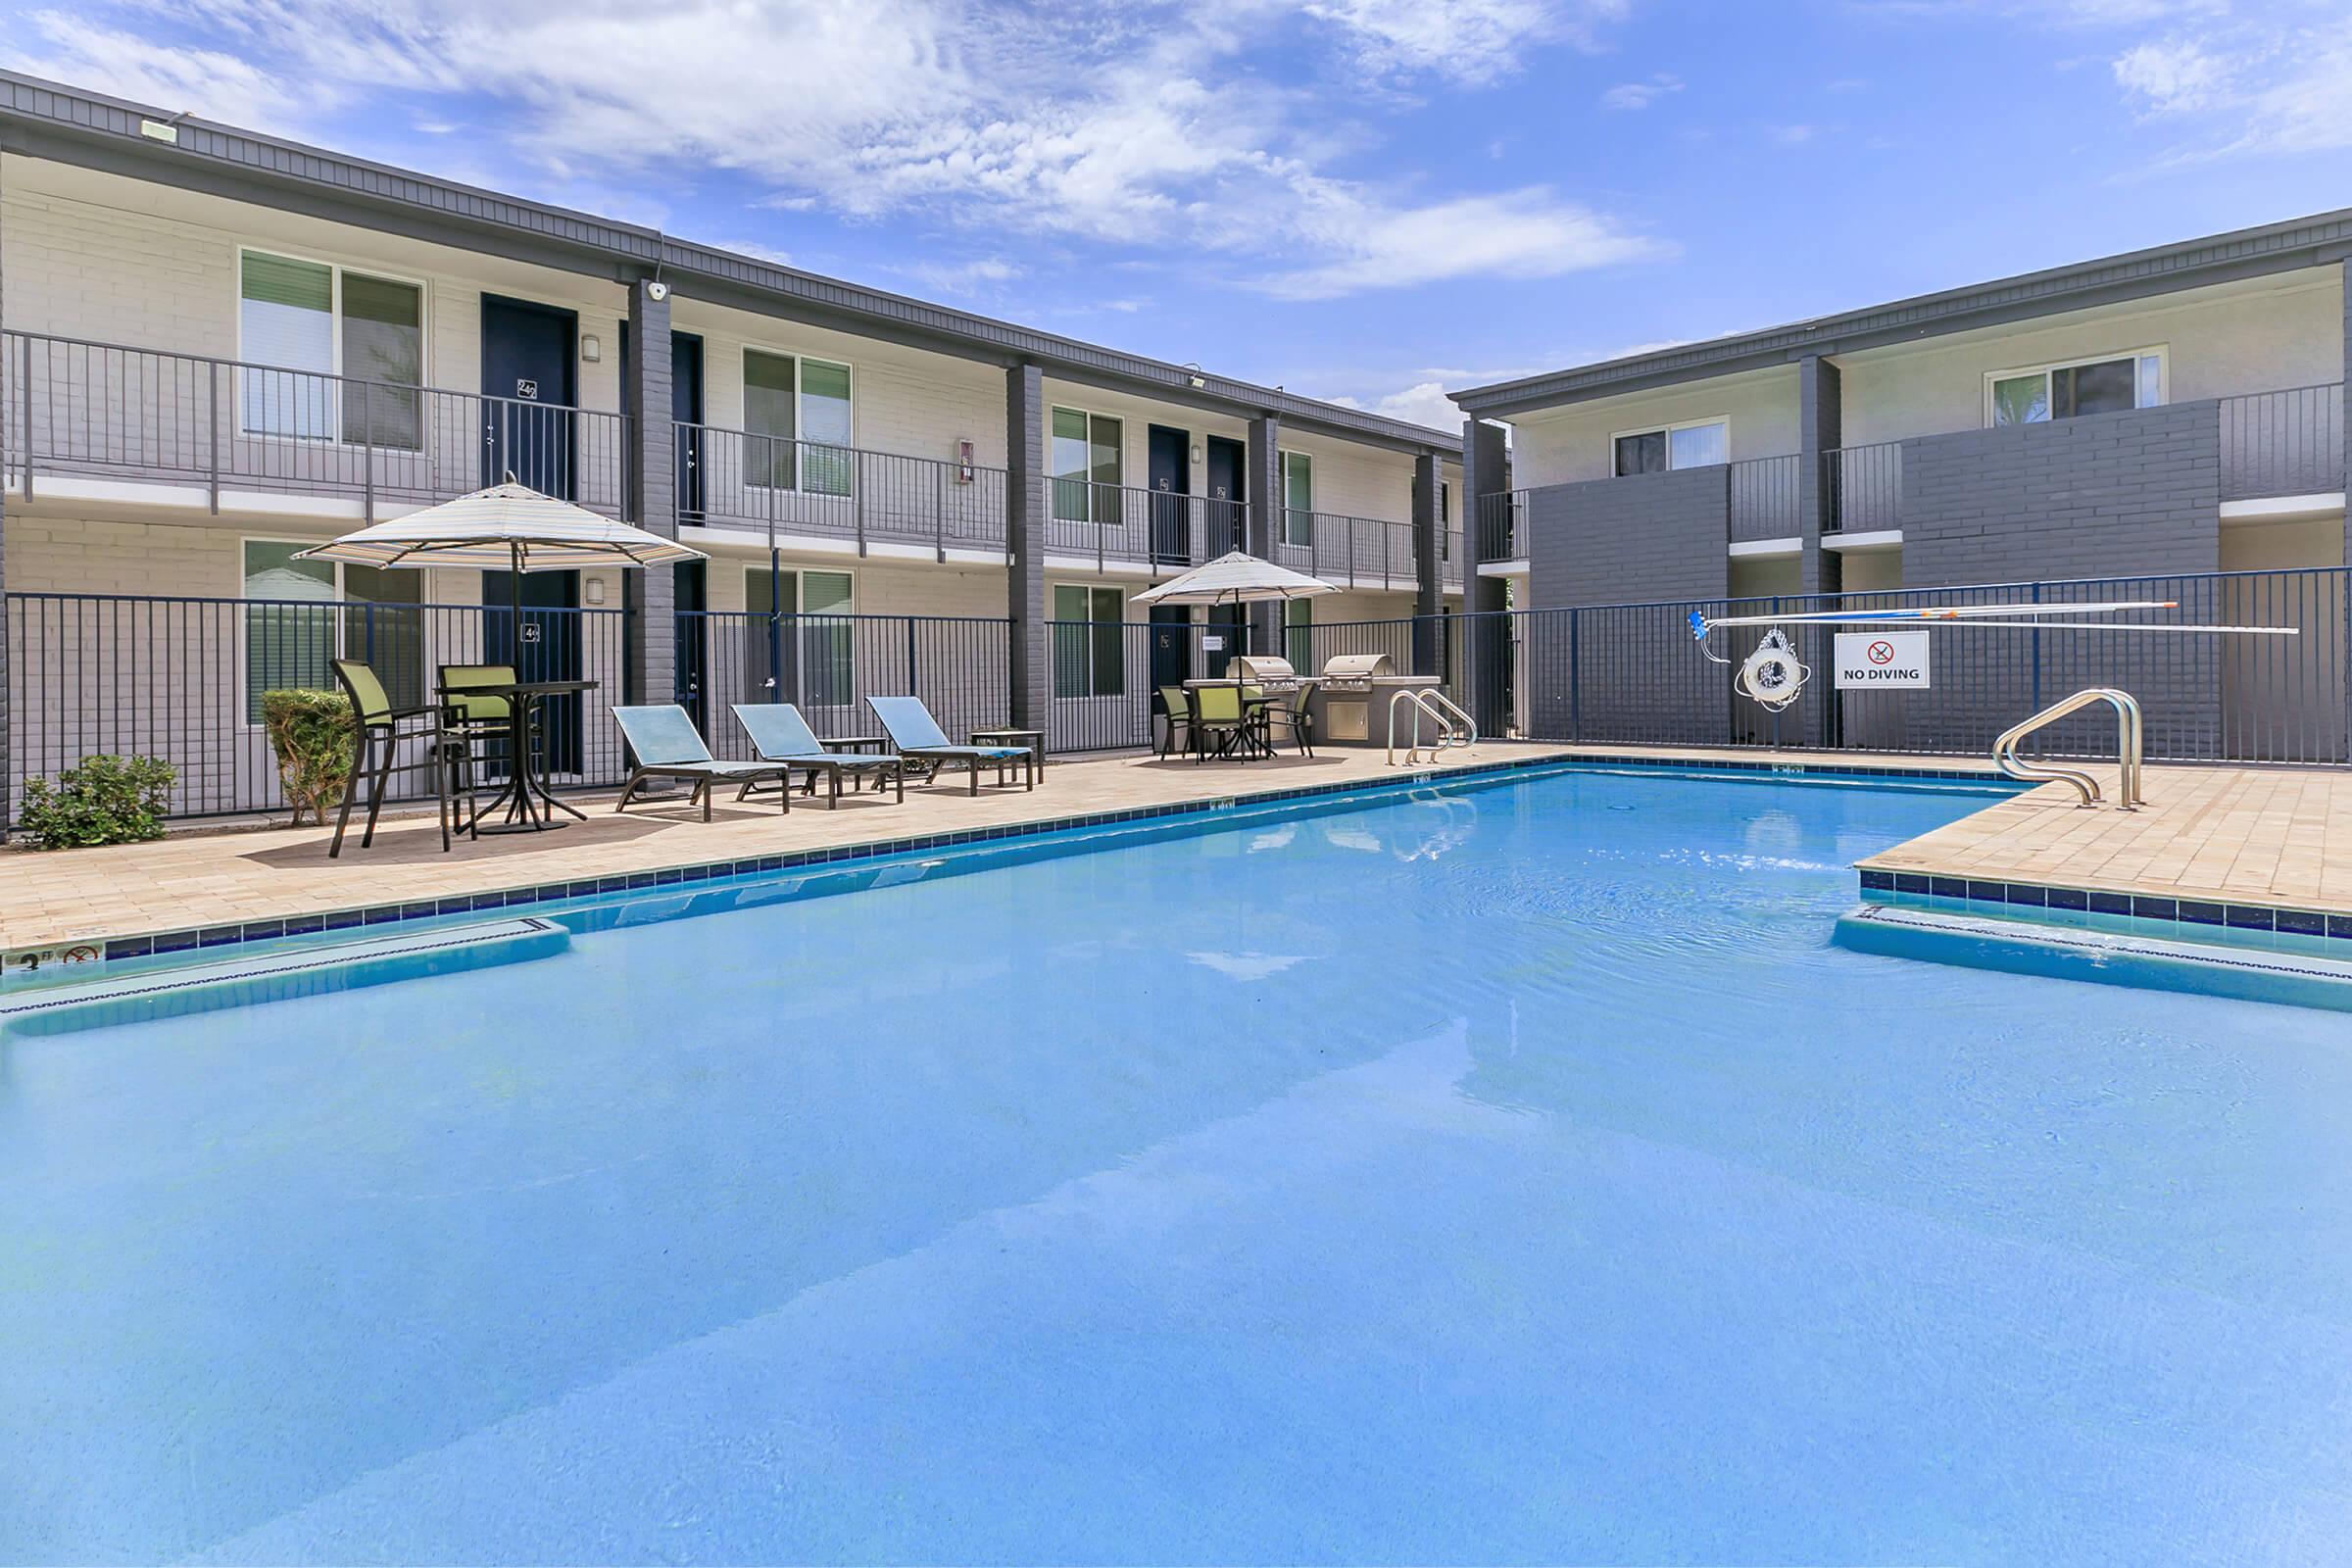 Large outdoor swimming pool surrounded by two-story north Phoenix apartment buildings